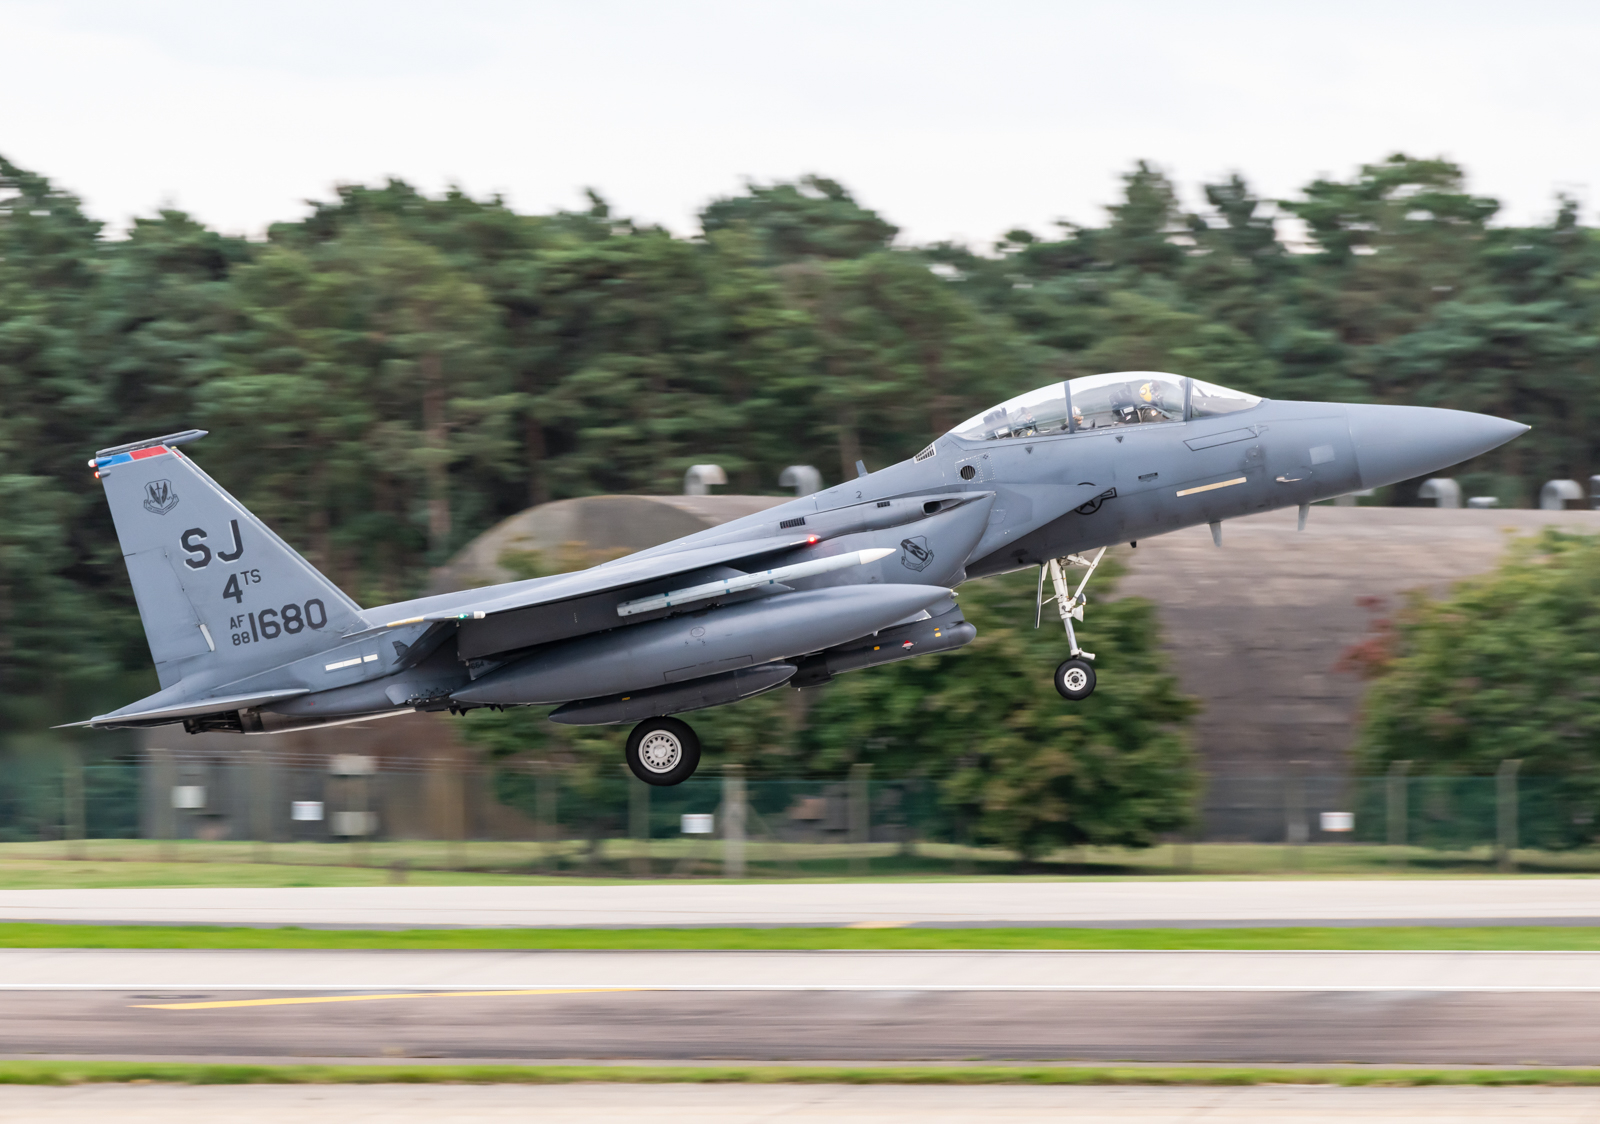 Yesterday 15 F15E’s arrived at RAF Lakenheath from the 4th Fighter Wing at Seymour Johnson. They included this Eagle, 88-1680/SJ carrying the unusual marks of the 4th Training Squadron which isn’t common on this side of the Atlantic. I am presuming that the deployment to the Middle East to take over from the current Lakenheath detachment is by the 336 FS as most of the crews were wearing yellow flight helmets.